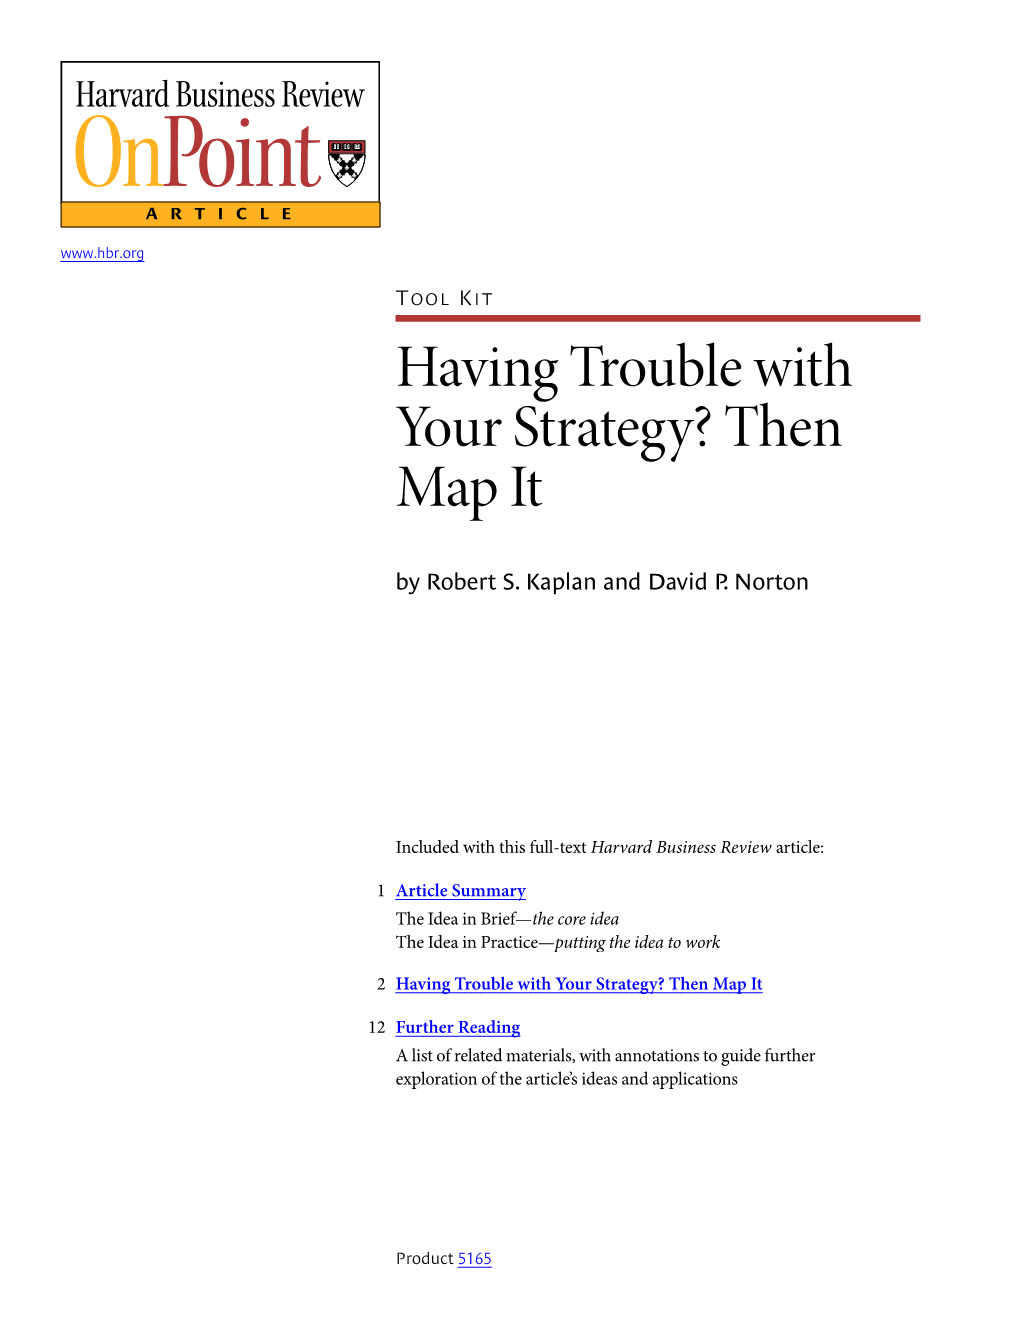 Having Trouble with Your Strategy? Then Map It